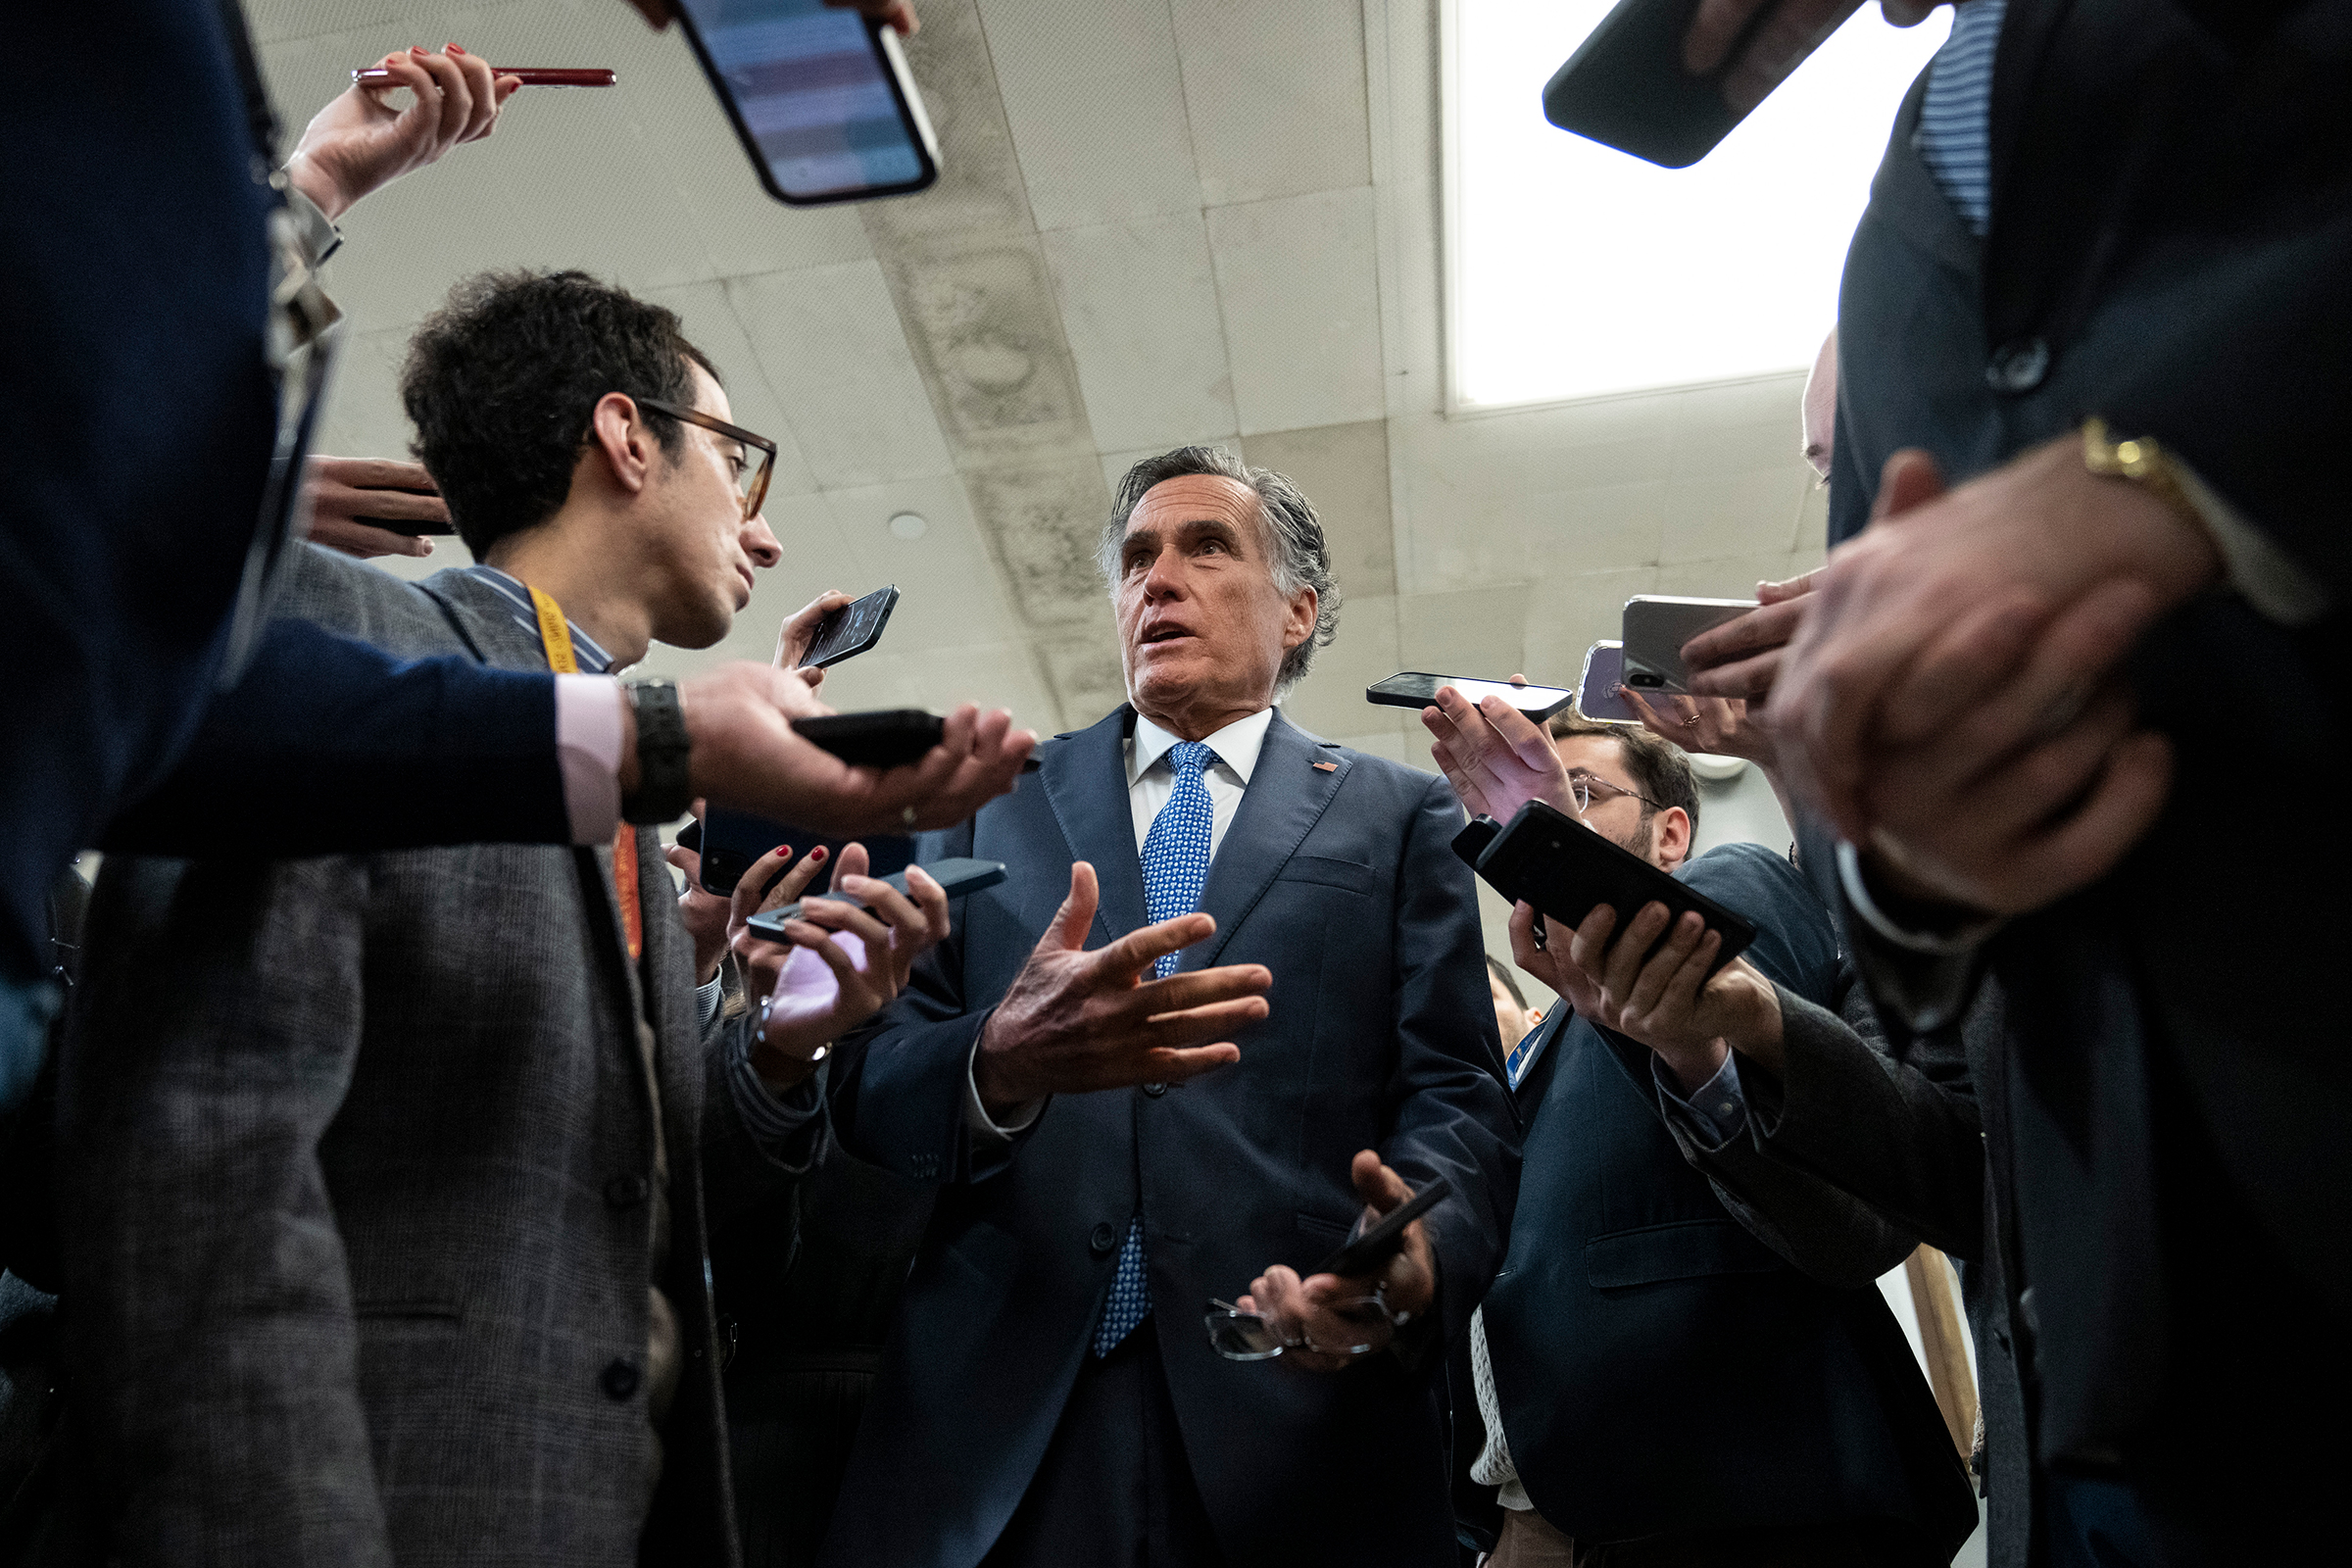 Sen. Mitt Romney speaks to reporters in the Senate subway on his way to a vote at the Capitol on March 14, in Washington, DC. 